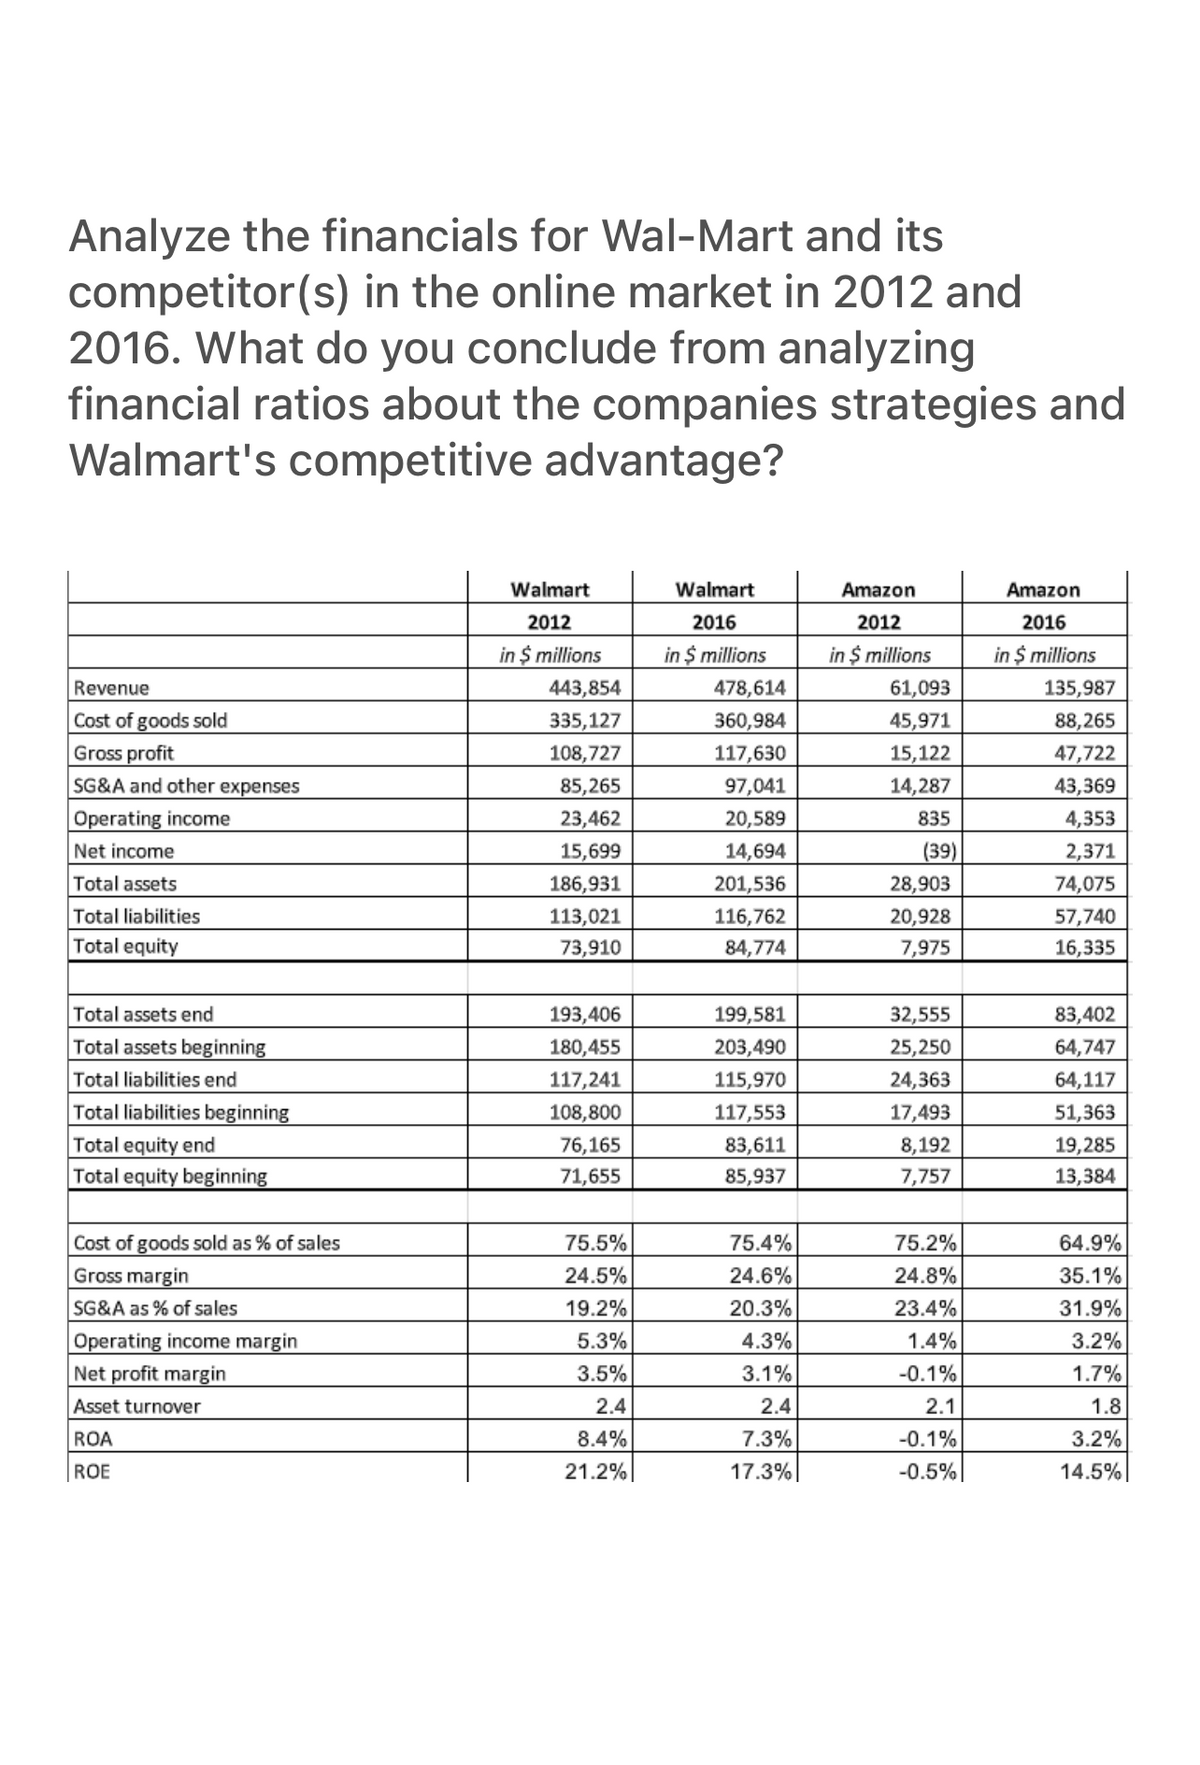 Analyze the financials for Wal-Mart and its
competitor(s) in the online market in 2012 and
2016. What do you conclude from analyzing
financial ratios about the companies strategies and
Walmart's competitive advantage?
Revenue
Cost of goods sold
Gross profit
SG&A and other expenses
Operating income
Net income
Total assets
Total liabilities
Total equity
Total assets end
Total assets beginning
Total liabilities end
Total liabilities beginning
Total equity end
Total equity beginning
Cost of goods sold as % of sales
Gross margin
SG&A as % of sales
Operating income margin
Net profit margin
Asset turnover
ROA
ROE
Walmart
2012
in $ millions
443,854
335,127
108,727
85,265
23,462
15,699
186,931
113,021
73,910
193,406
180,455
117,241
108,800
76,165
71,655
75.5%
24.5%
19.2%
5.3%
3.5%
2.4
8.4%
21.2%
Walmart
2016
in $ millions
478,614
360,984
117,630
97,041
20,589
14,694
201,536
116,762
84,774
199,581
203,490
115,970
117,553
83,611
85,937
75.4%
24.6%
20.3%
4.3%
3.1%
2.4
7.3%
17.3%
Amazon
2012
in $ millions
61,093
45,971
15,122
14,287
835
(39)
28,903
20,928
7,975
32,555
25,250
24,363
17,493
8,192
7,757
75.2%
24.8%
23.4%
1.4%
-0.1%
2.1
-0.1%
-0.5%
Amazon
2016
in $ millions
135,987
88,265
47,722
43,369
4,353
2,371
74,075
57,740
16,335
83,402
64,747
64,117
51,363
19,285
13,384
64.9%
35.1%
31.9%
3.2%
1.7%
1.8
3.2%
14.5%